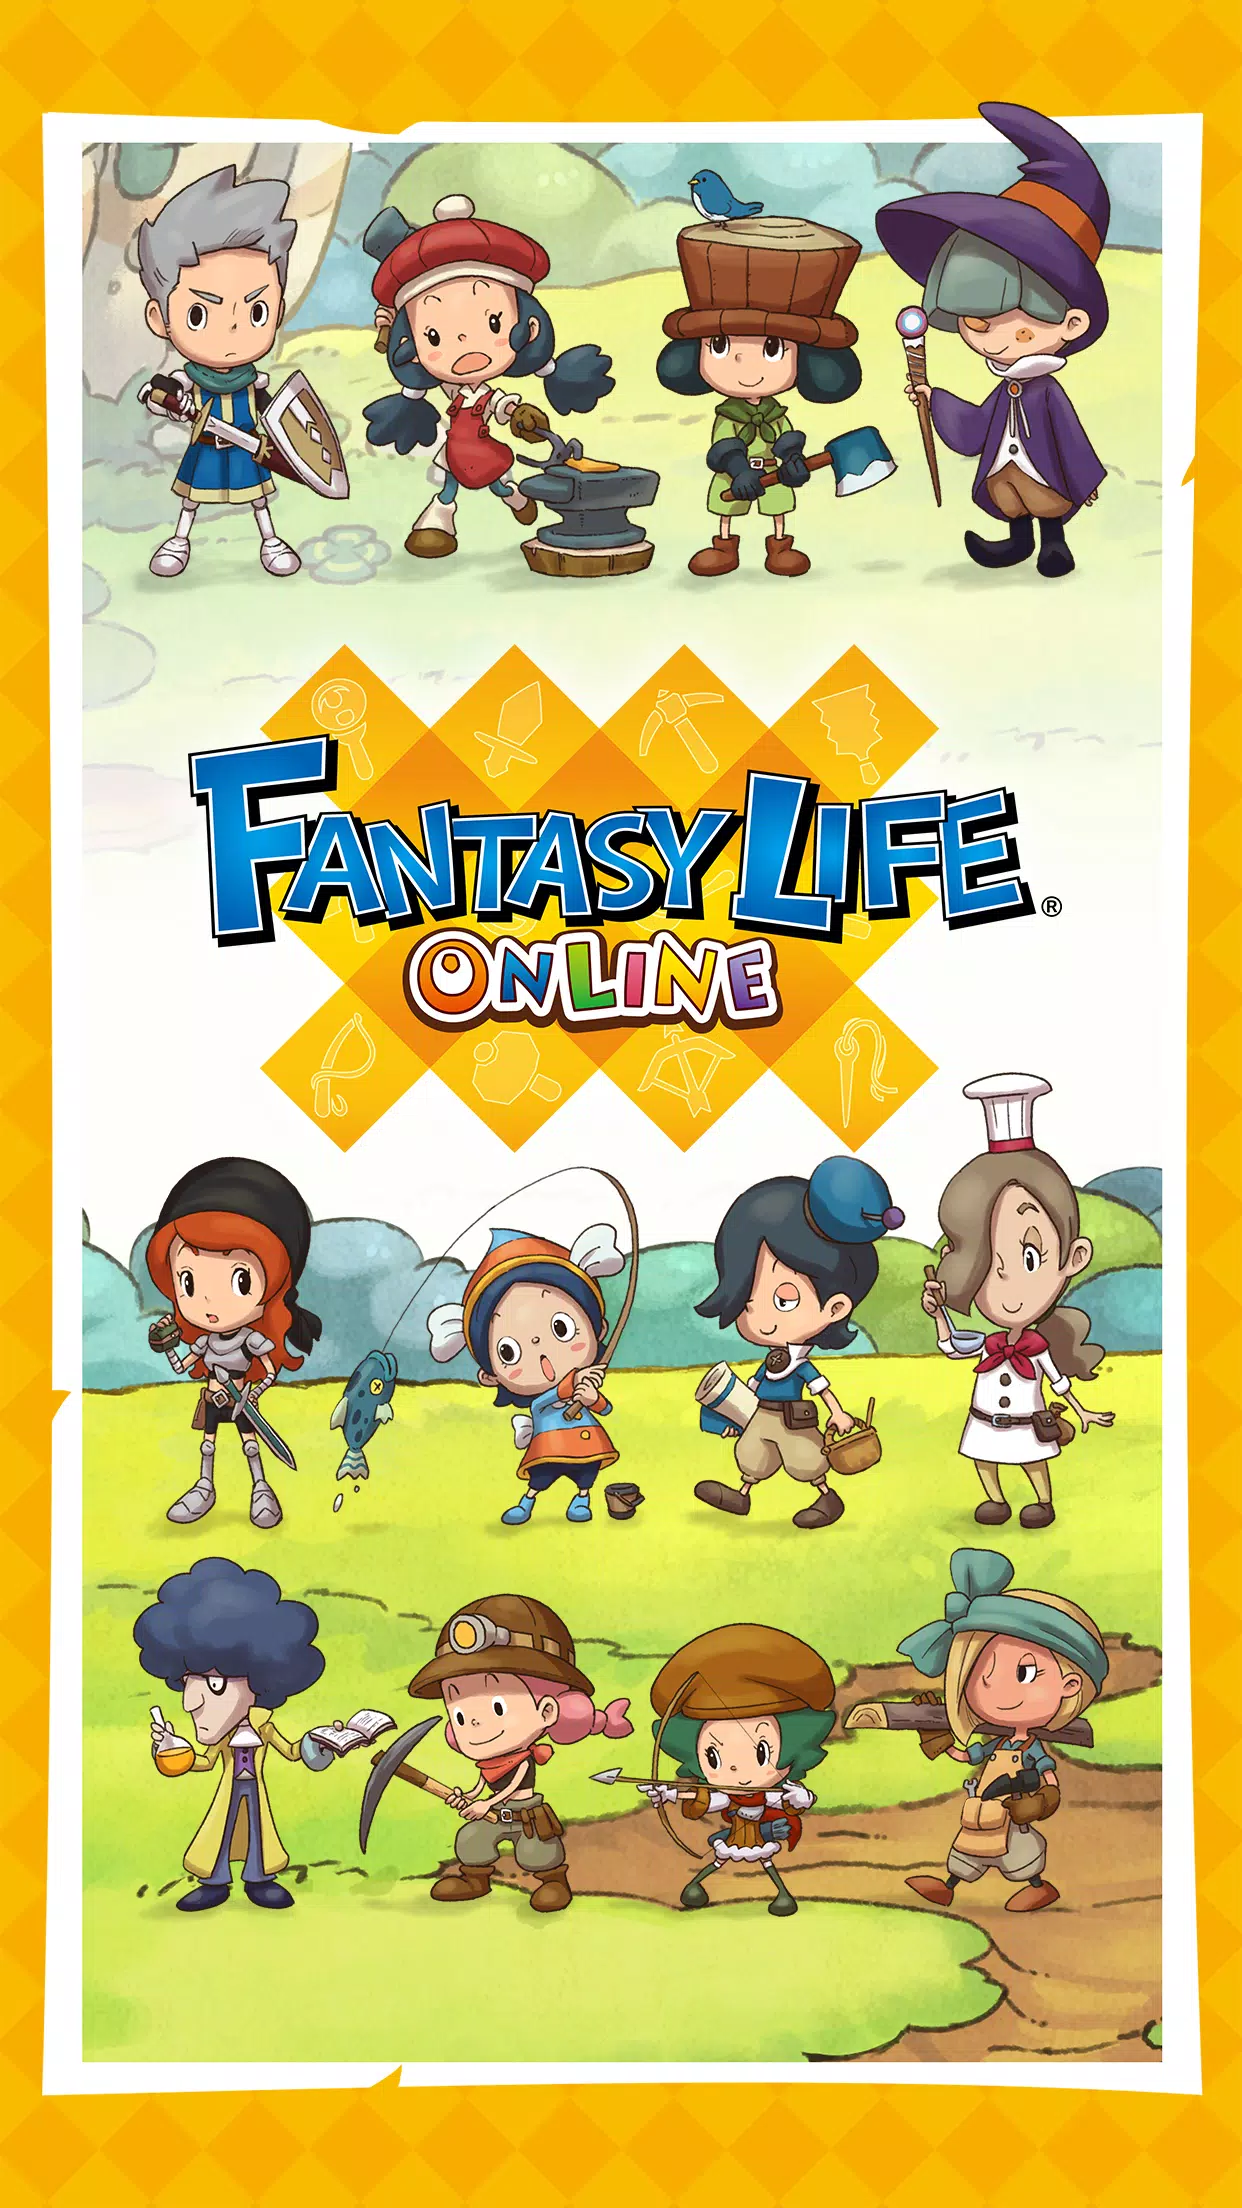 Fantasy Life Online - Download & Play for Free Here